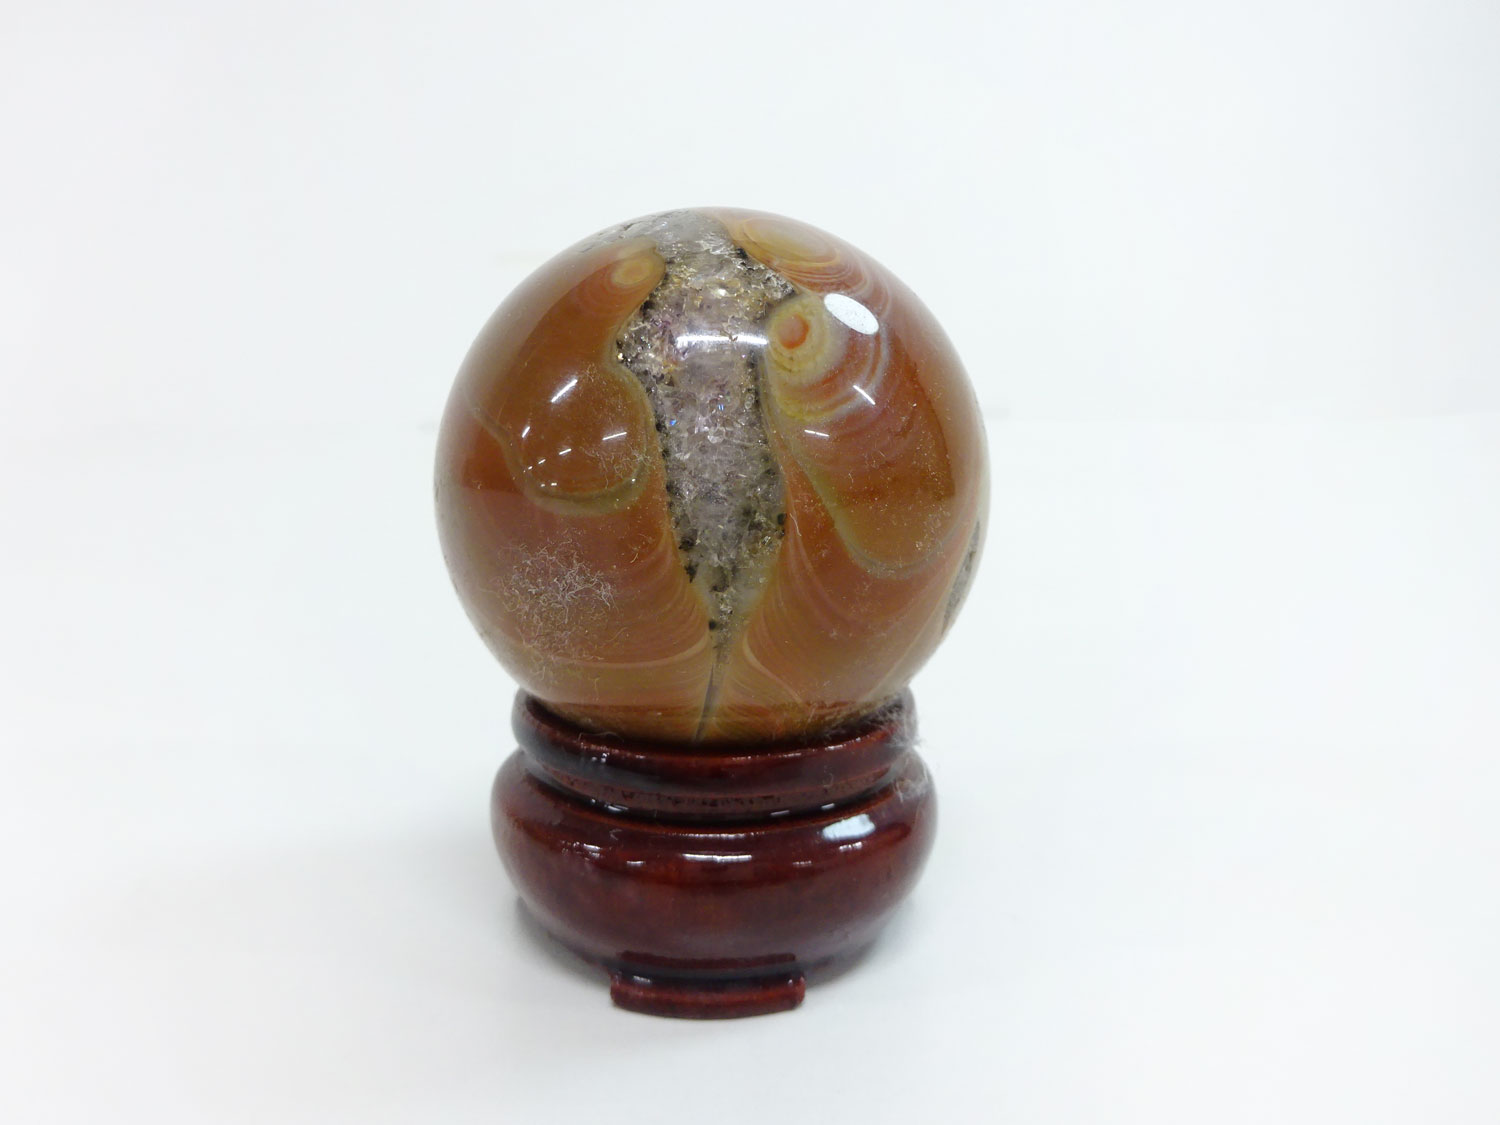 JAPANESE ORNAMENT / NATURAL CRYSTAL & MINERAL (158.52g) / HEALING CRYSTAL SPHERE